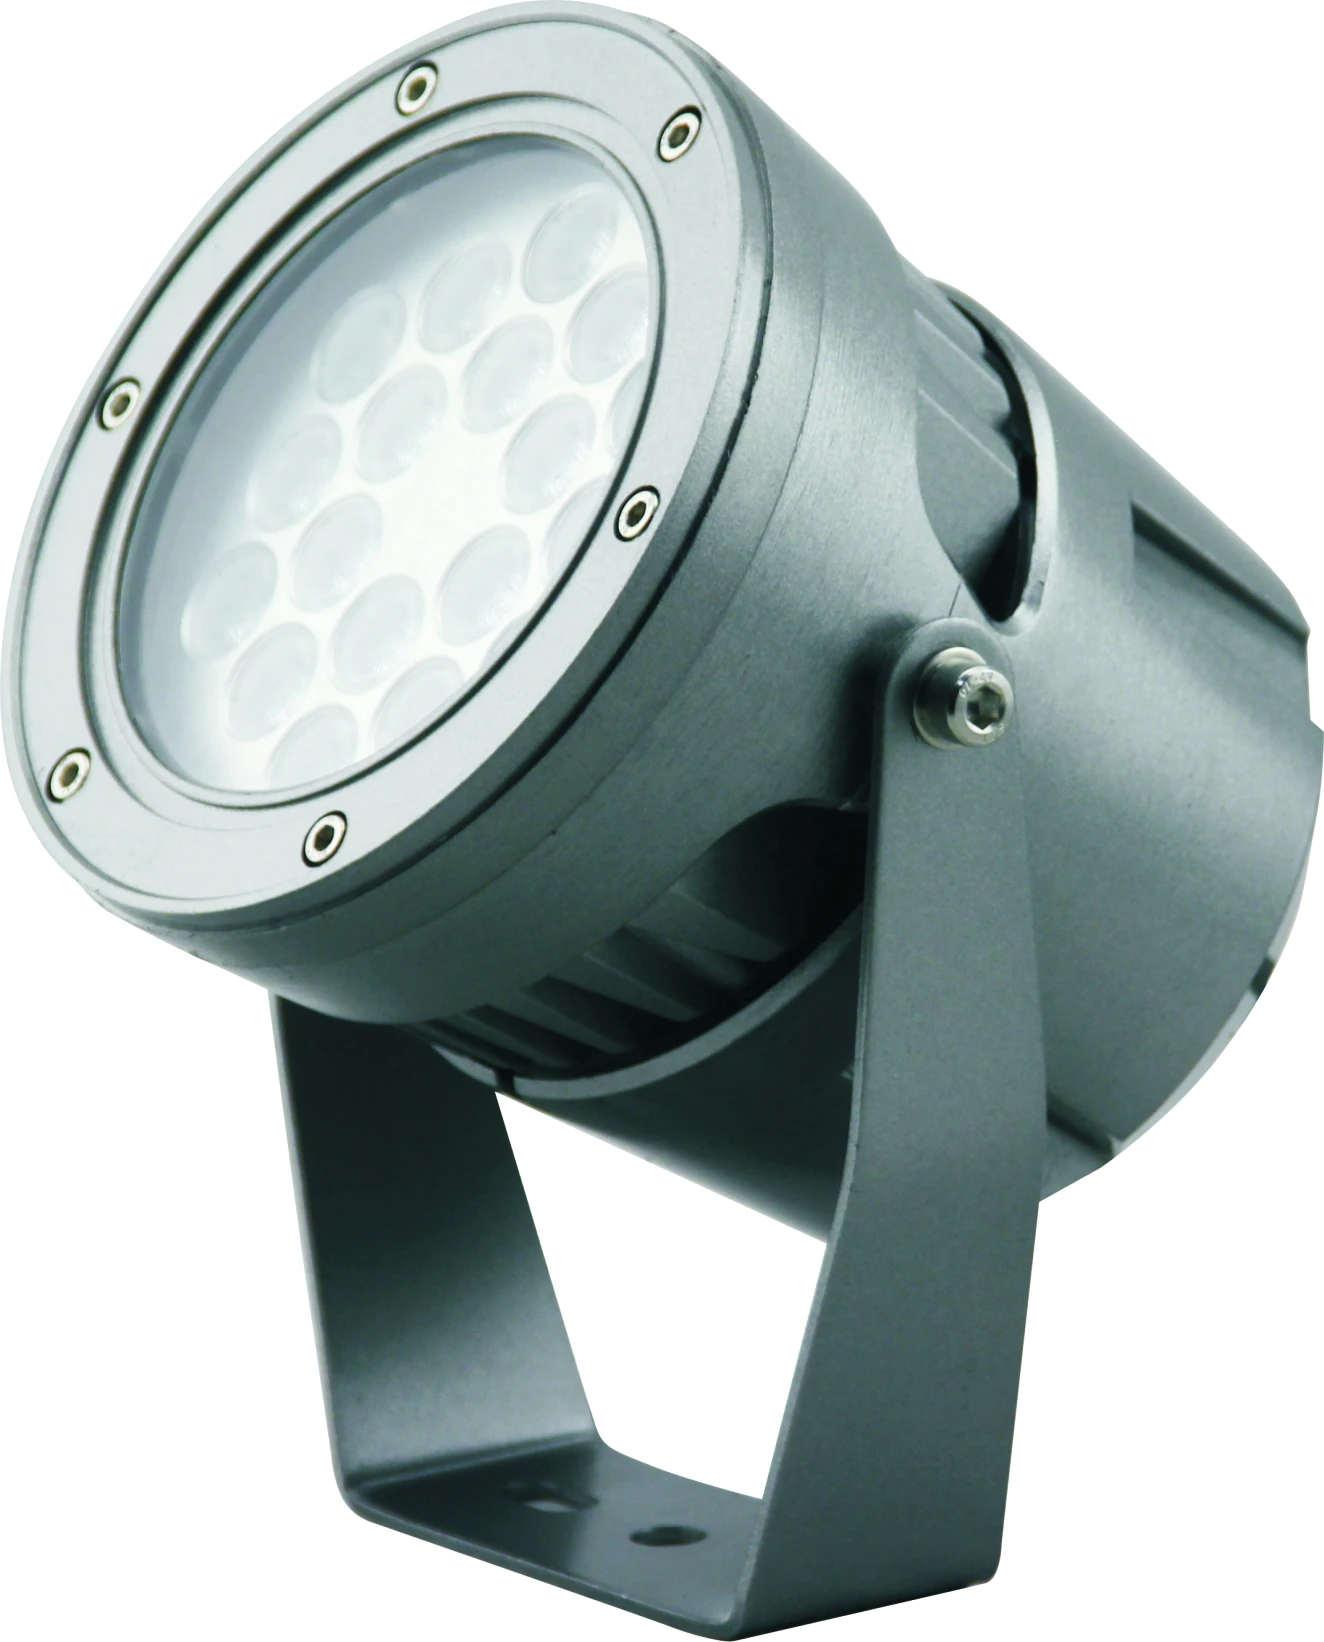 U type outdoor LED flood light with top quality chips+ MW driver